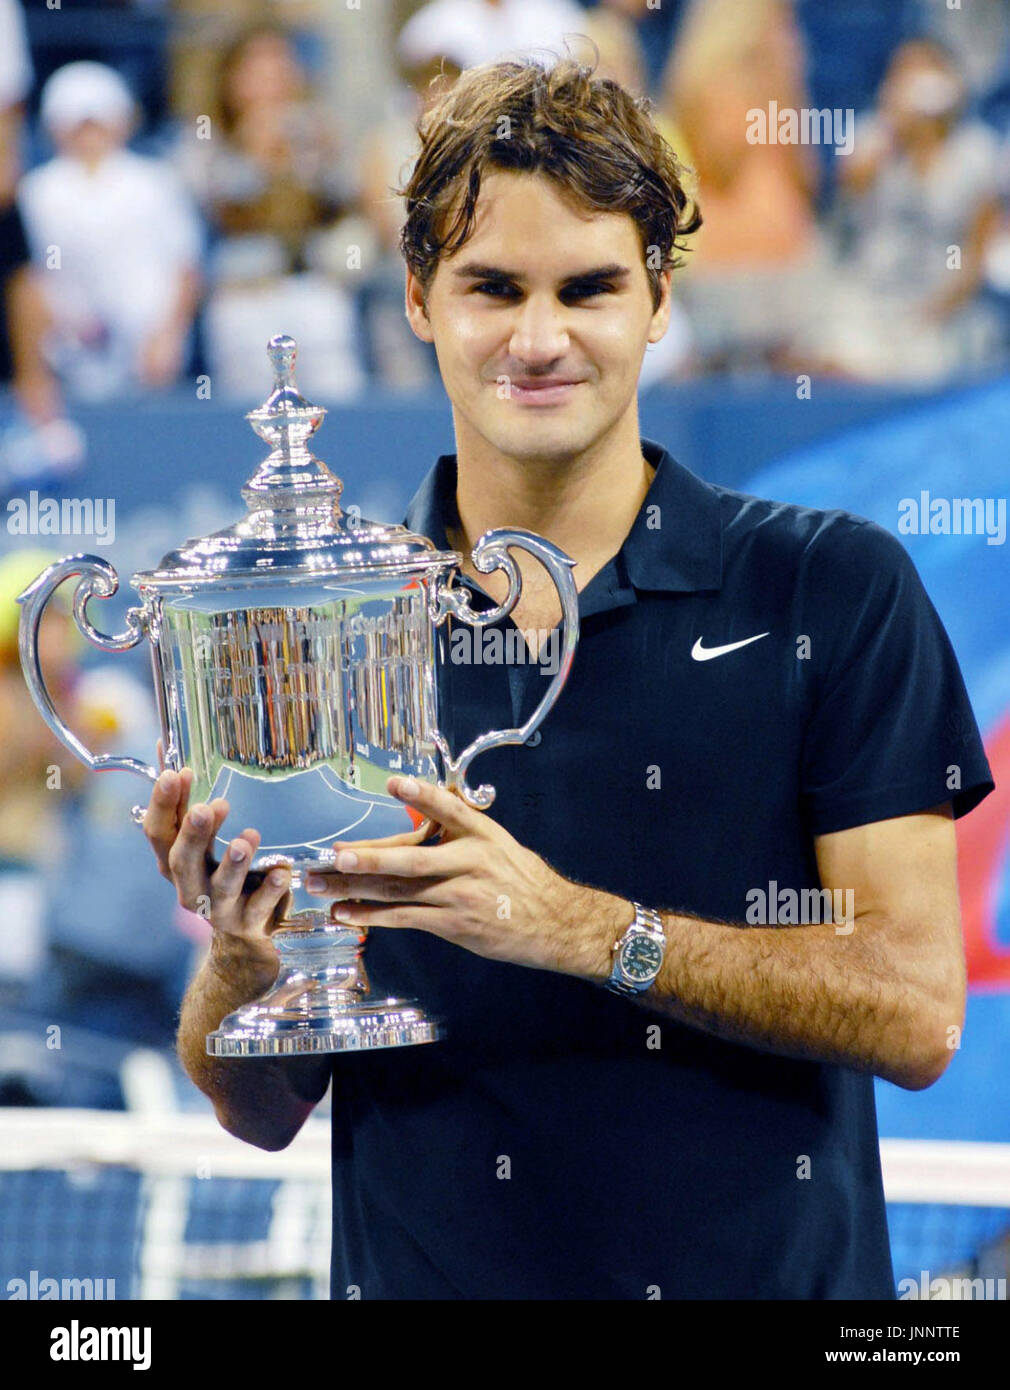 NEW YORK, United States - Roger Federer holds the winner's trophy after  beating Novak Djokovic of Serbia 7-6, 7-6, 6-4 to capture his fourth  successive U.S. Open title at Flushing Meadows, New